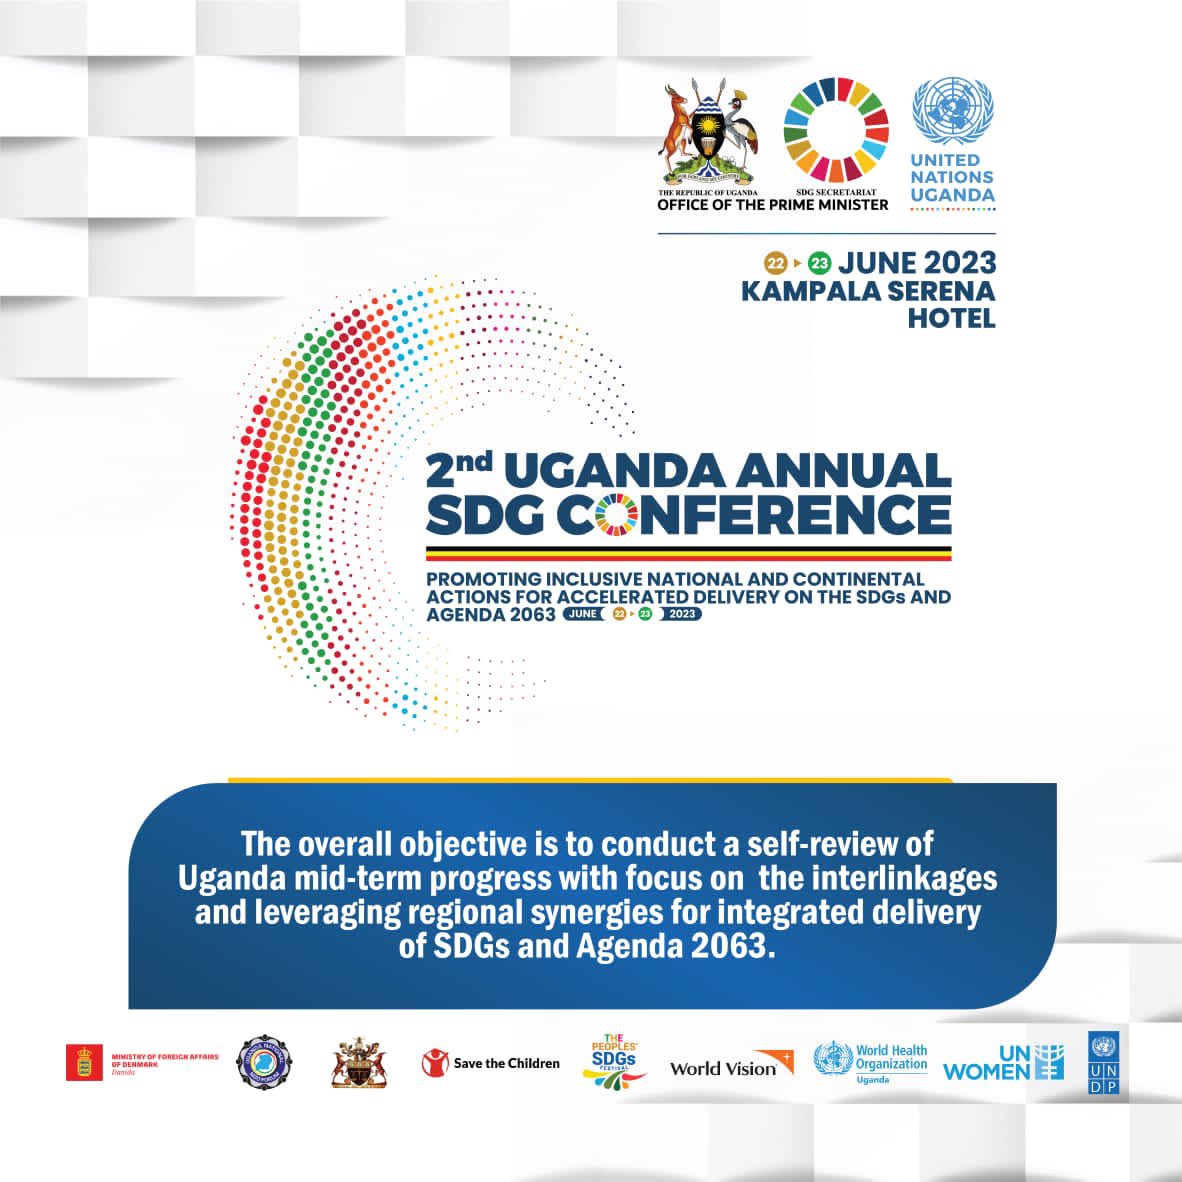 World leaders adopted the Sustainable Development Goals when Uganda held the UN General Assembly presidency in 2015. We will be showcasing the unique steps we have taken to achieve the SDGs at our 2nd Annual SDG conference which starts today @sdgs_ug #LeaveNoOneBehind